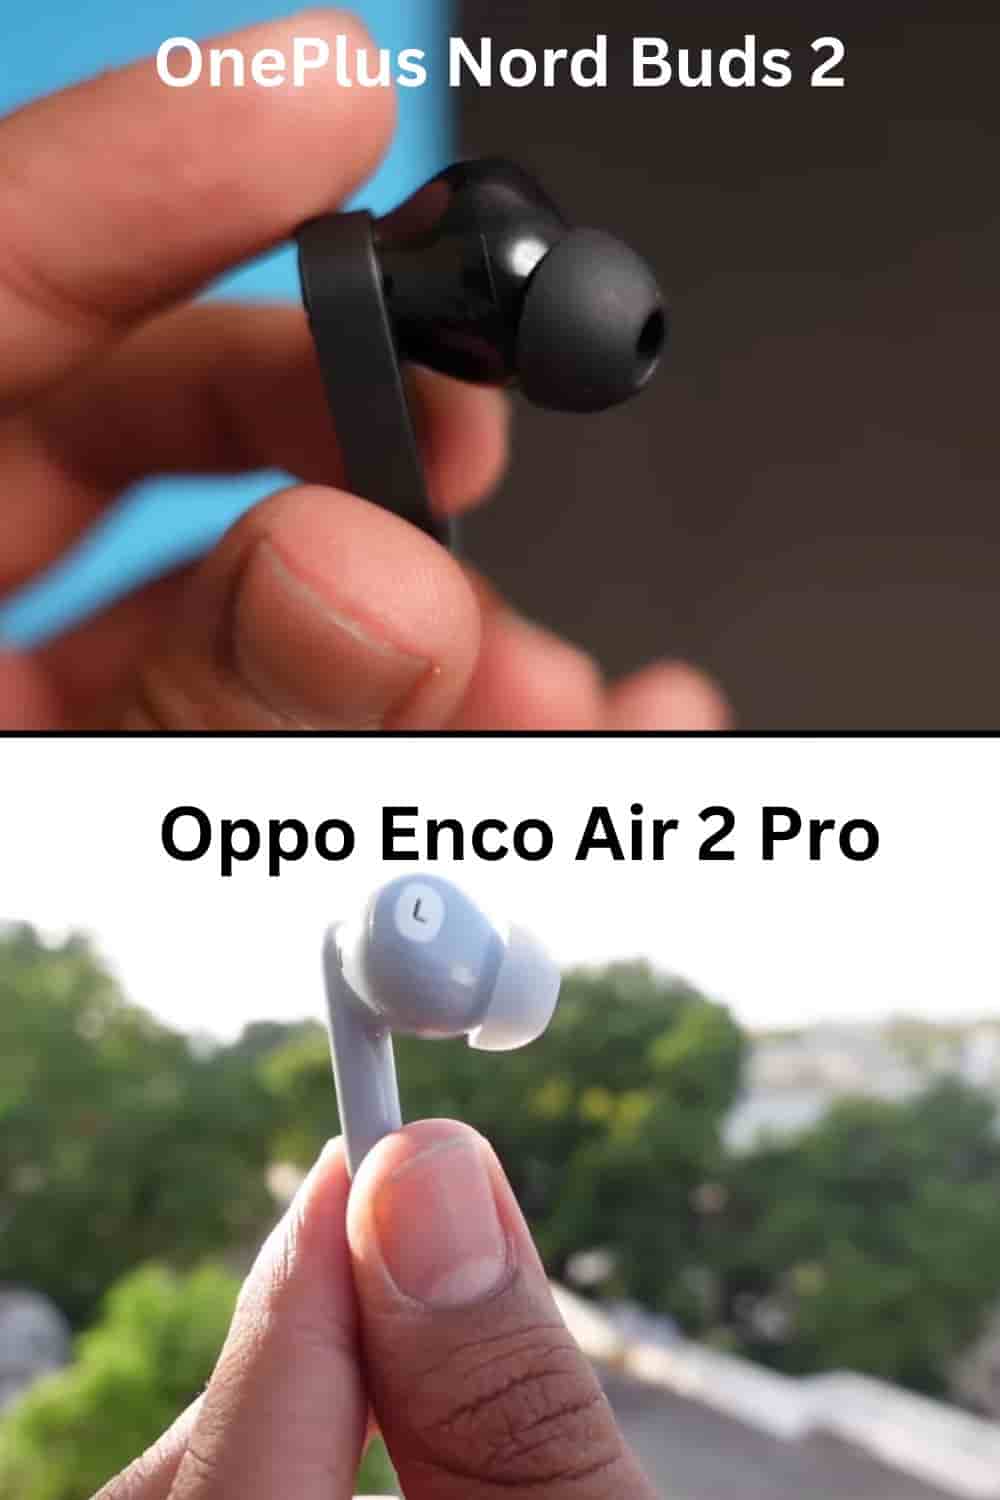 Earbud Design of OnePlus Nord Buds 2 and Oppo Enco Air 2 Pro